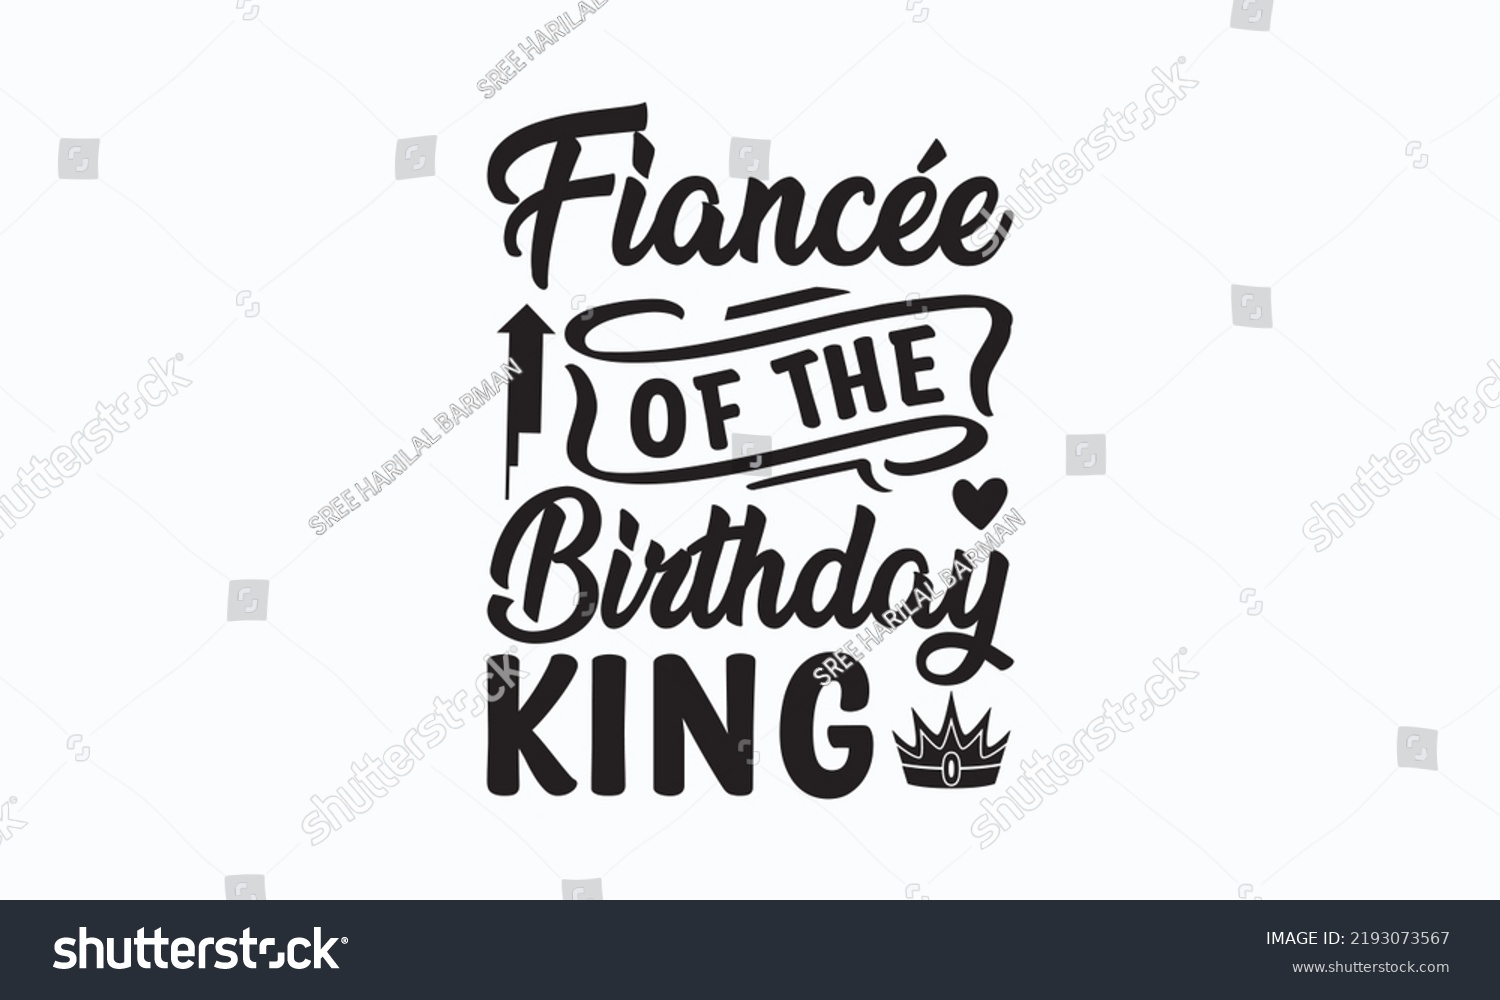 SVG of Fiancée of the birthday king - Birthday SVG Digest typographic vector design for greeting cards, Birthday cards, Good for scrapbooking, posters, templet, textiles, gifts, and wedding sets.  svg